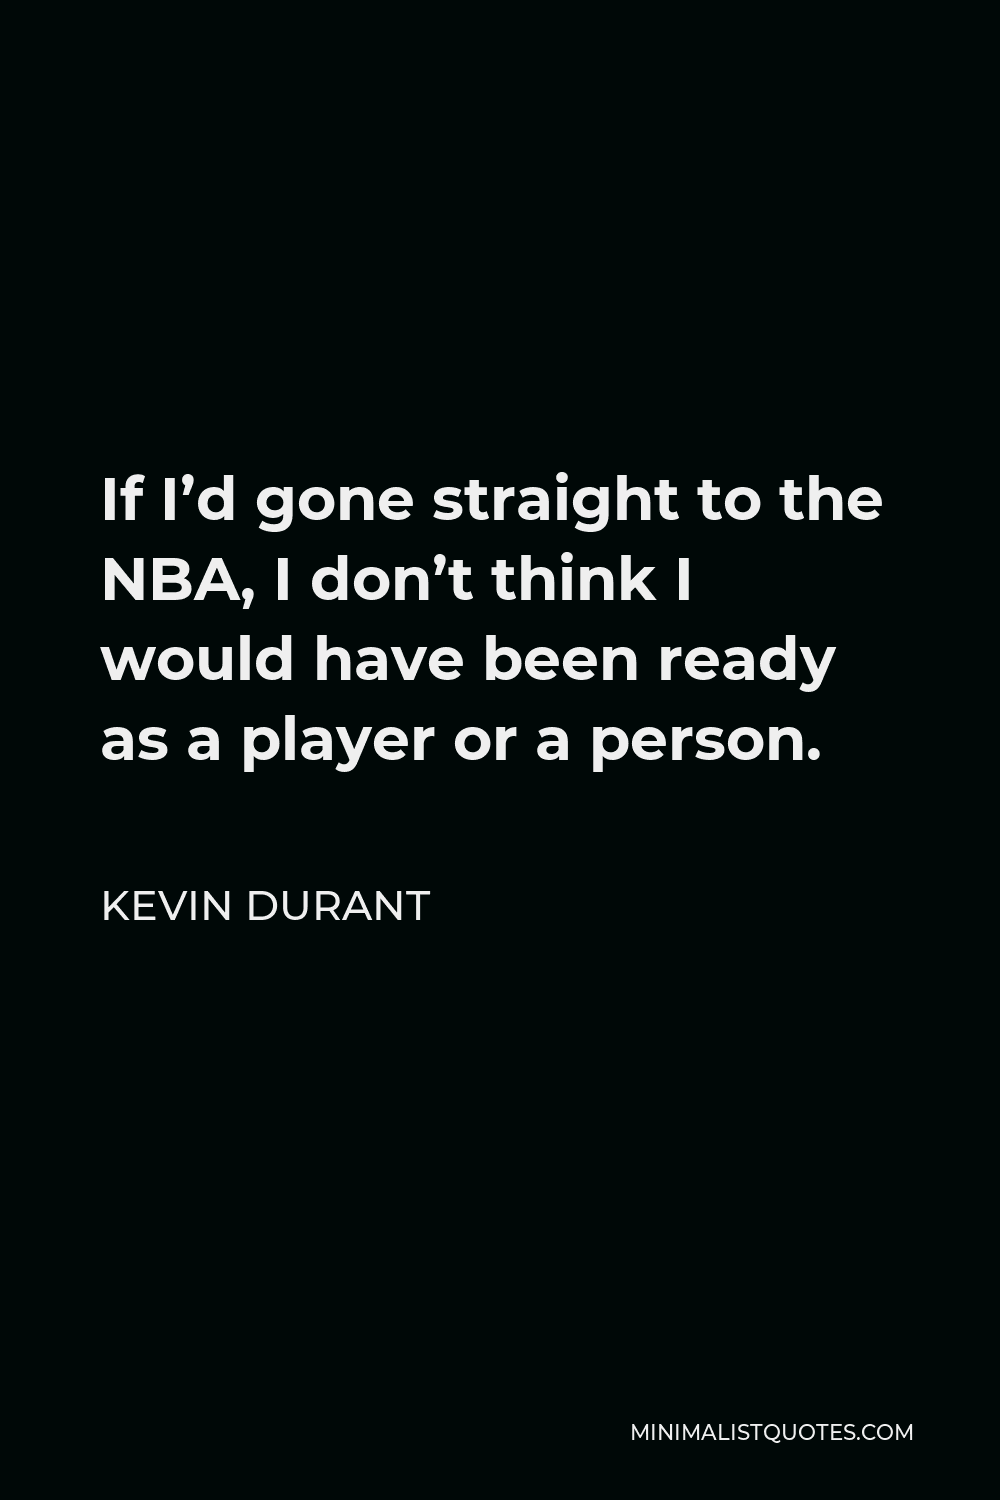 Kevin Durant Quote - If I’d gone straight to the NBA, I don’t think I would have been ready as a player or a person.